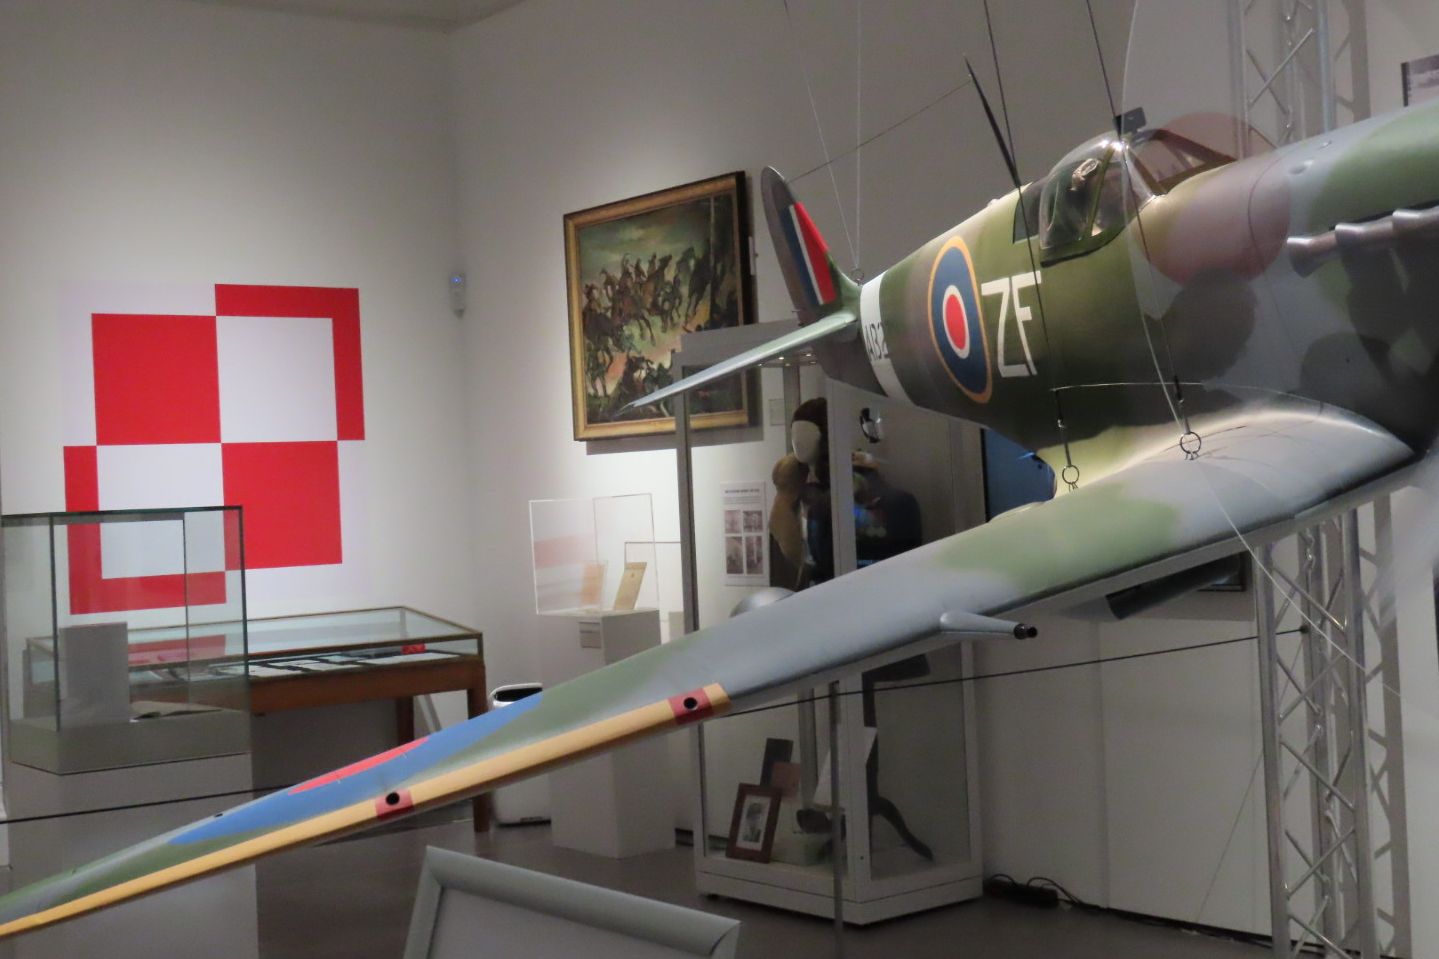 The Courage and Devotion exhibition at The Atkinson in Southport, which honours the Polish air crew and ground crew who served at RAF Woodvale near Southport during World War Two. It features a Spitfire sculpture by artist Suhail Shaikh. Photo by Andrew Brown Media